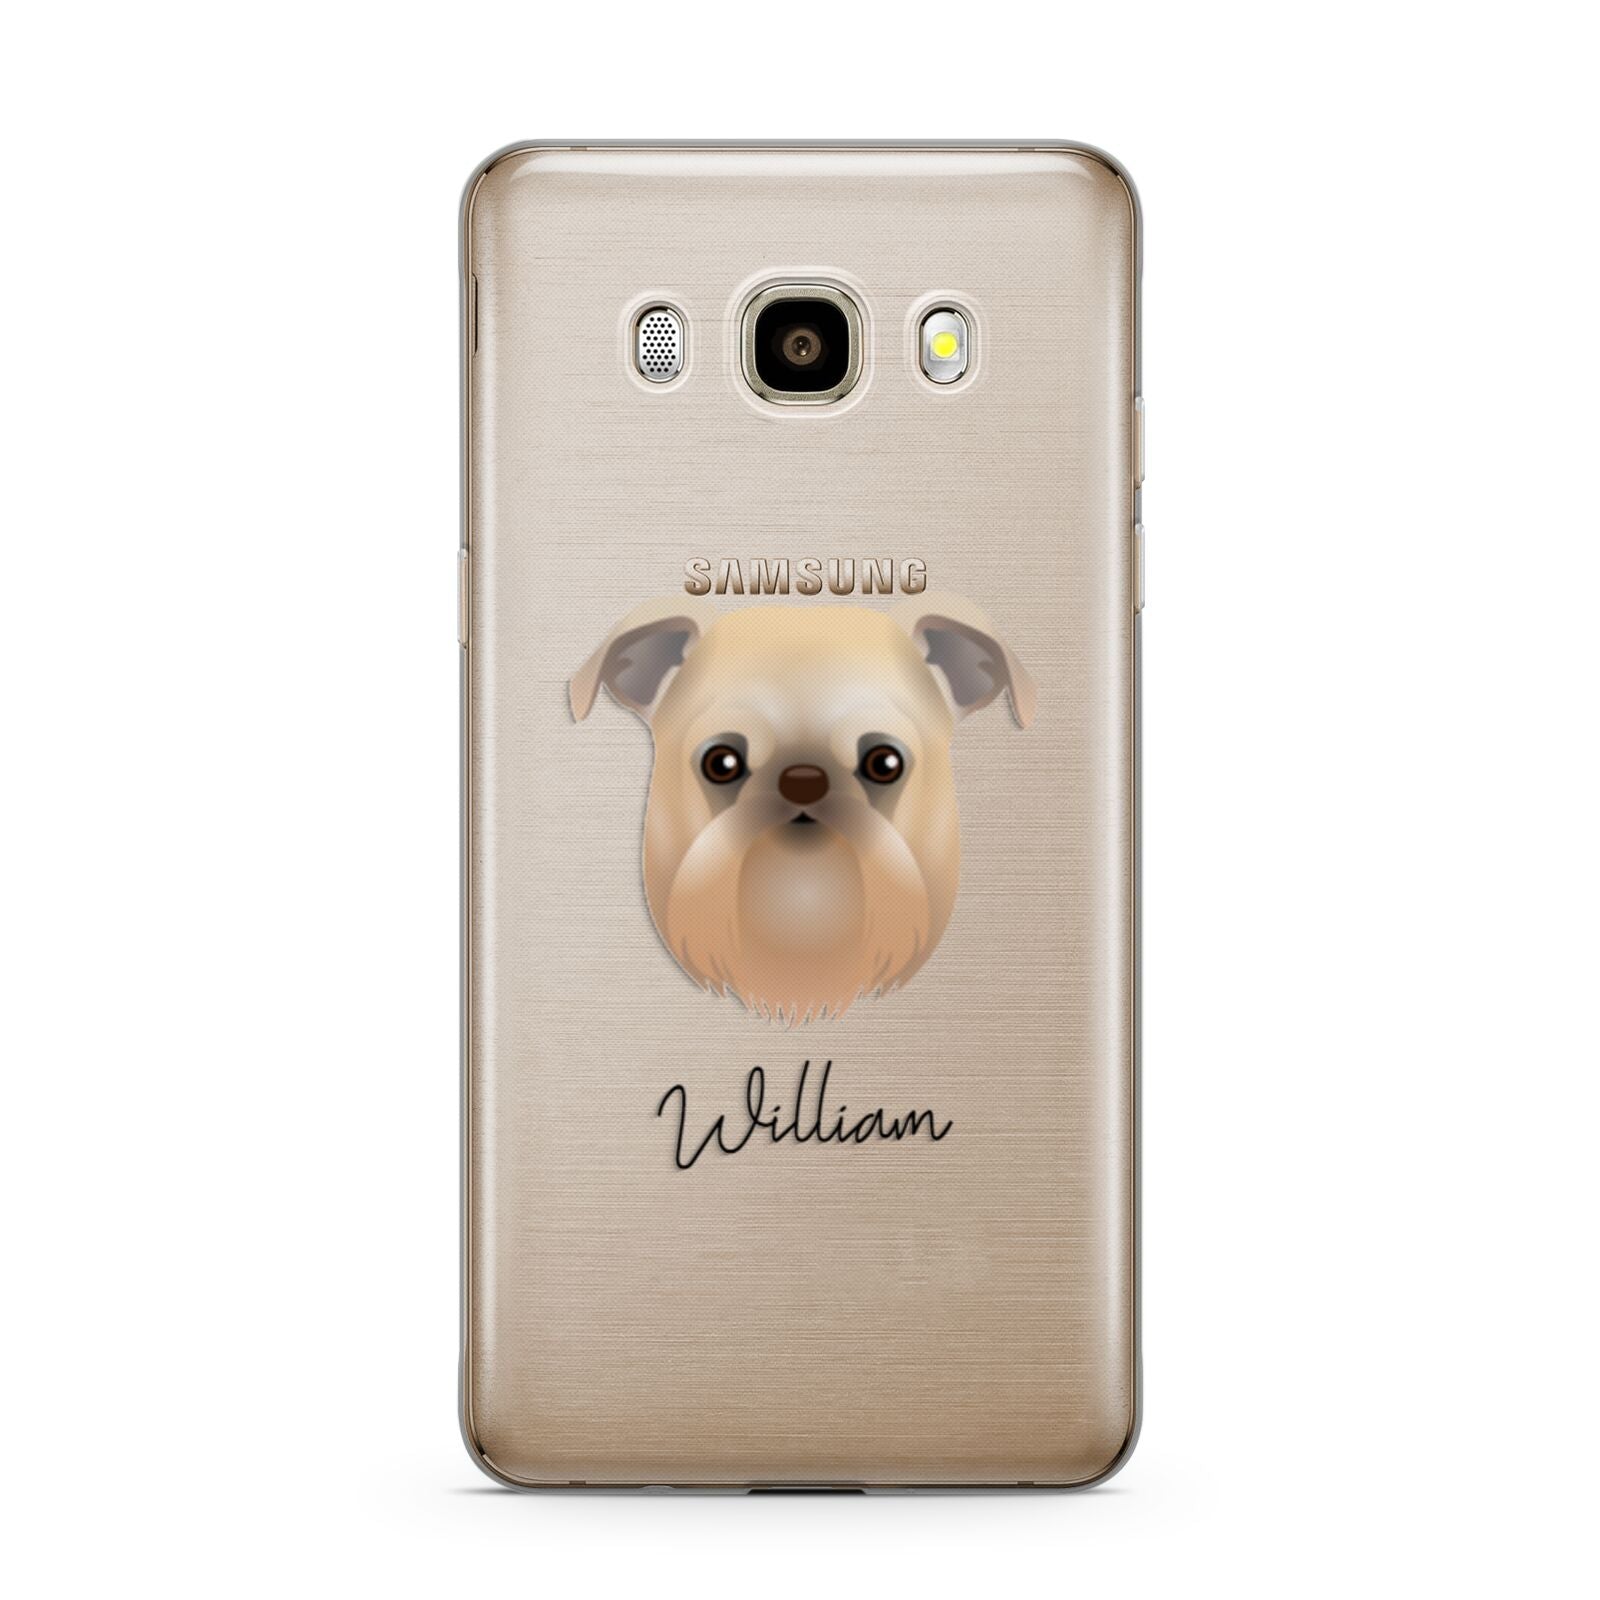 Griffon Bruxellois Personalised Samsung Galaxy J7 2016 Case on gold phone